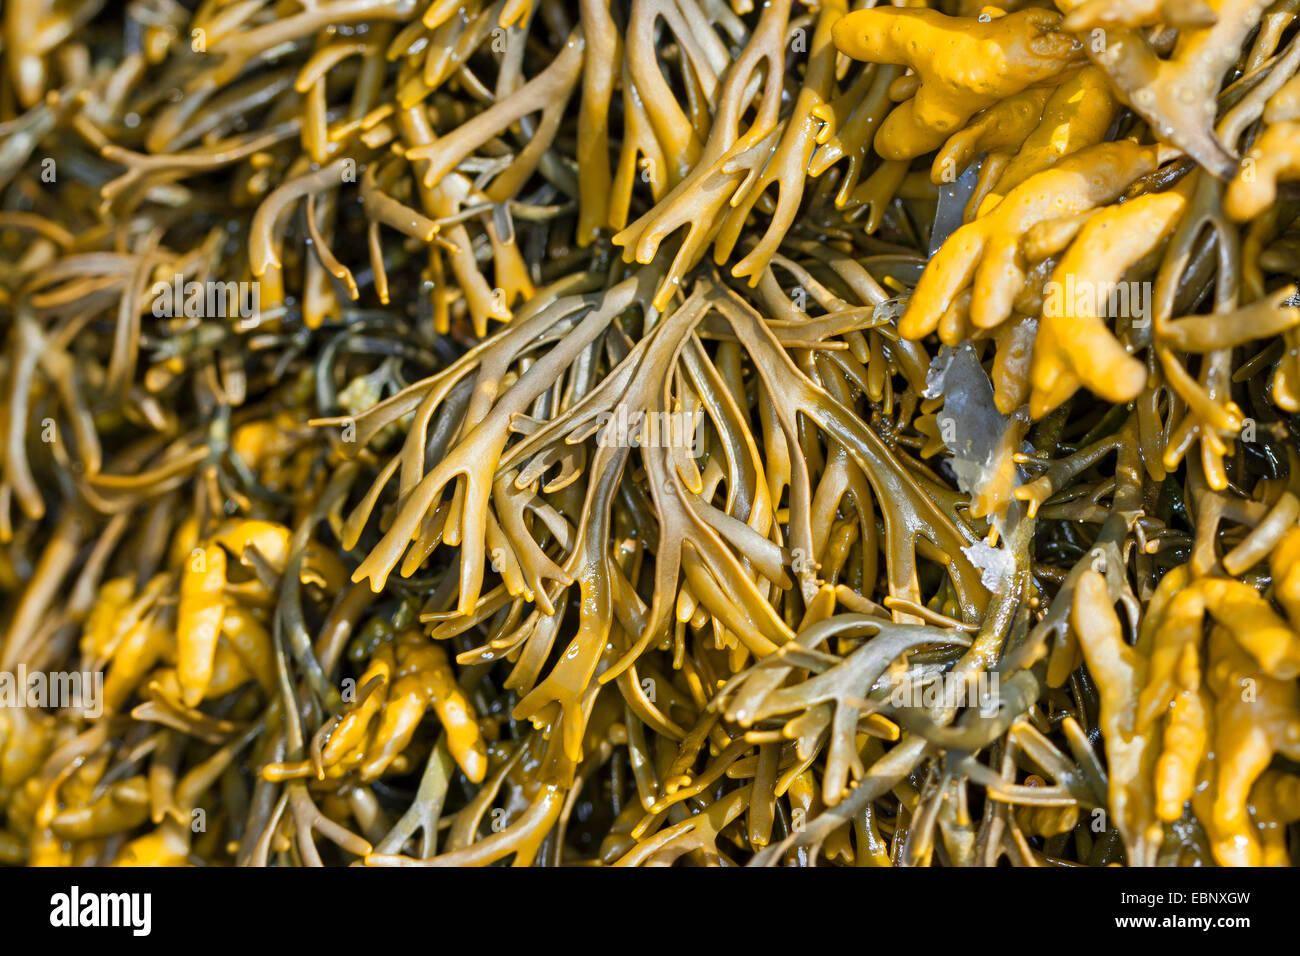 Channelled wrack, Cow Tang, Channel Wrack (Pelvetia canaliculata), with fruiting bodies, Germany Stock Photo